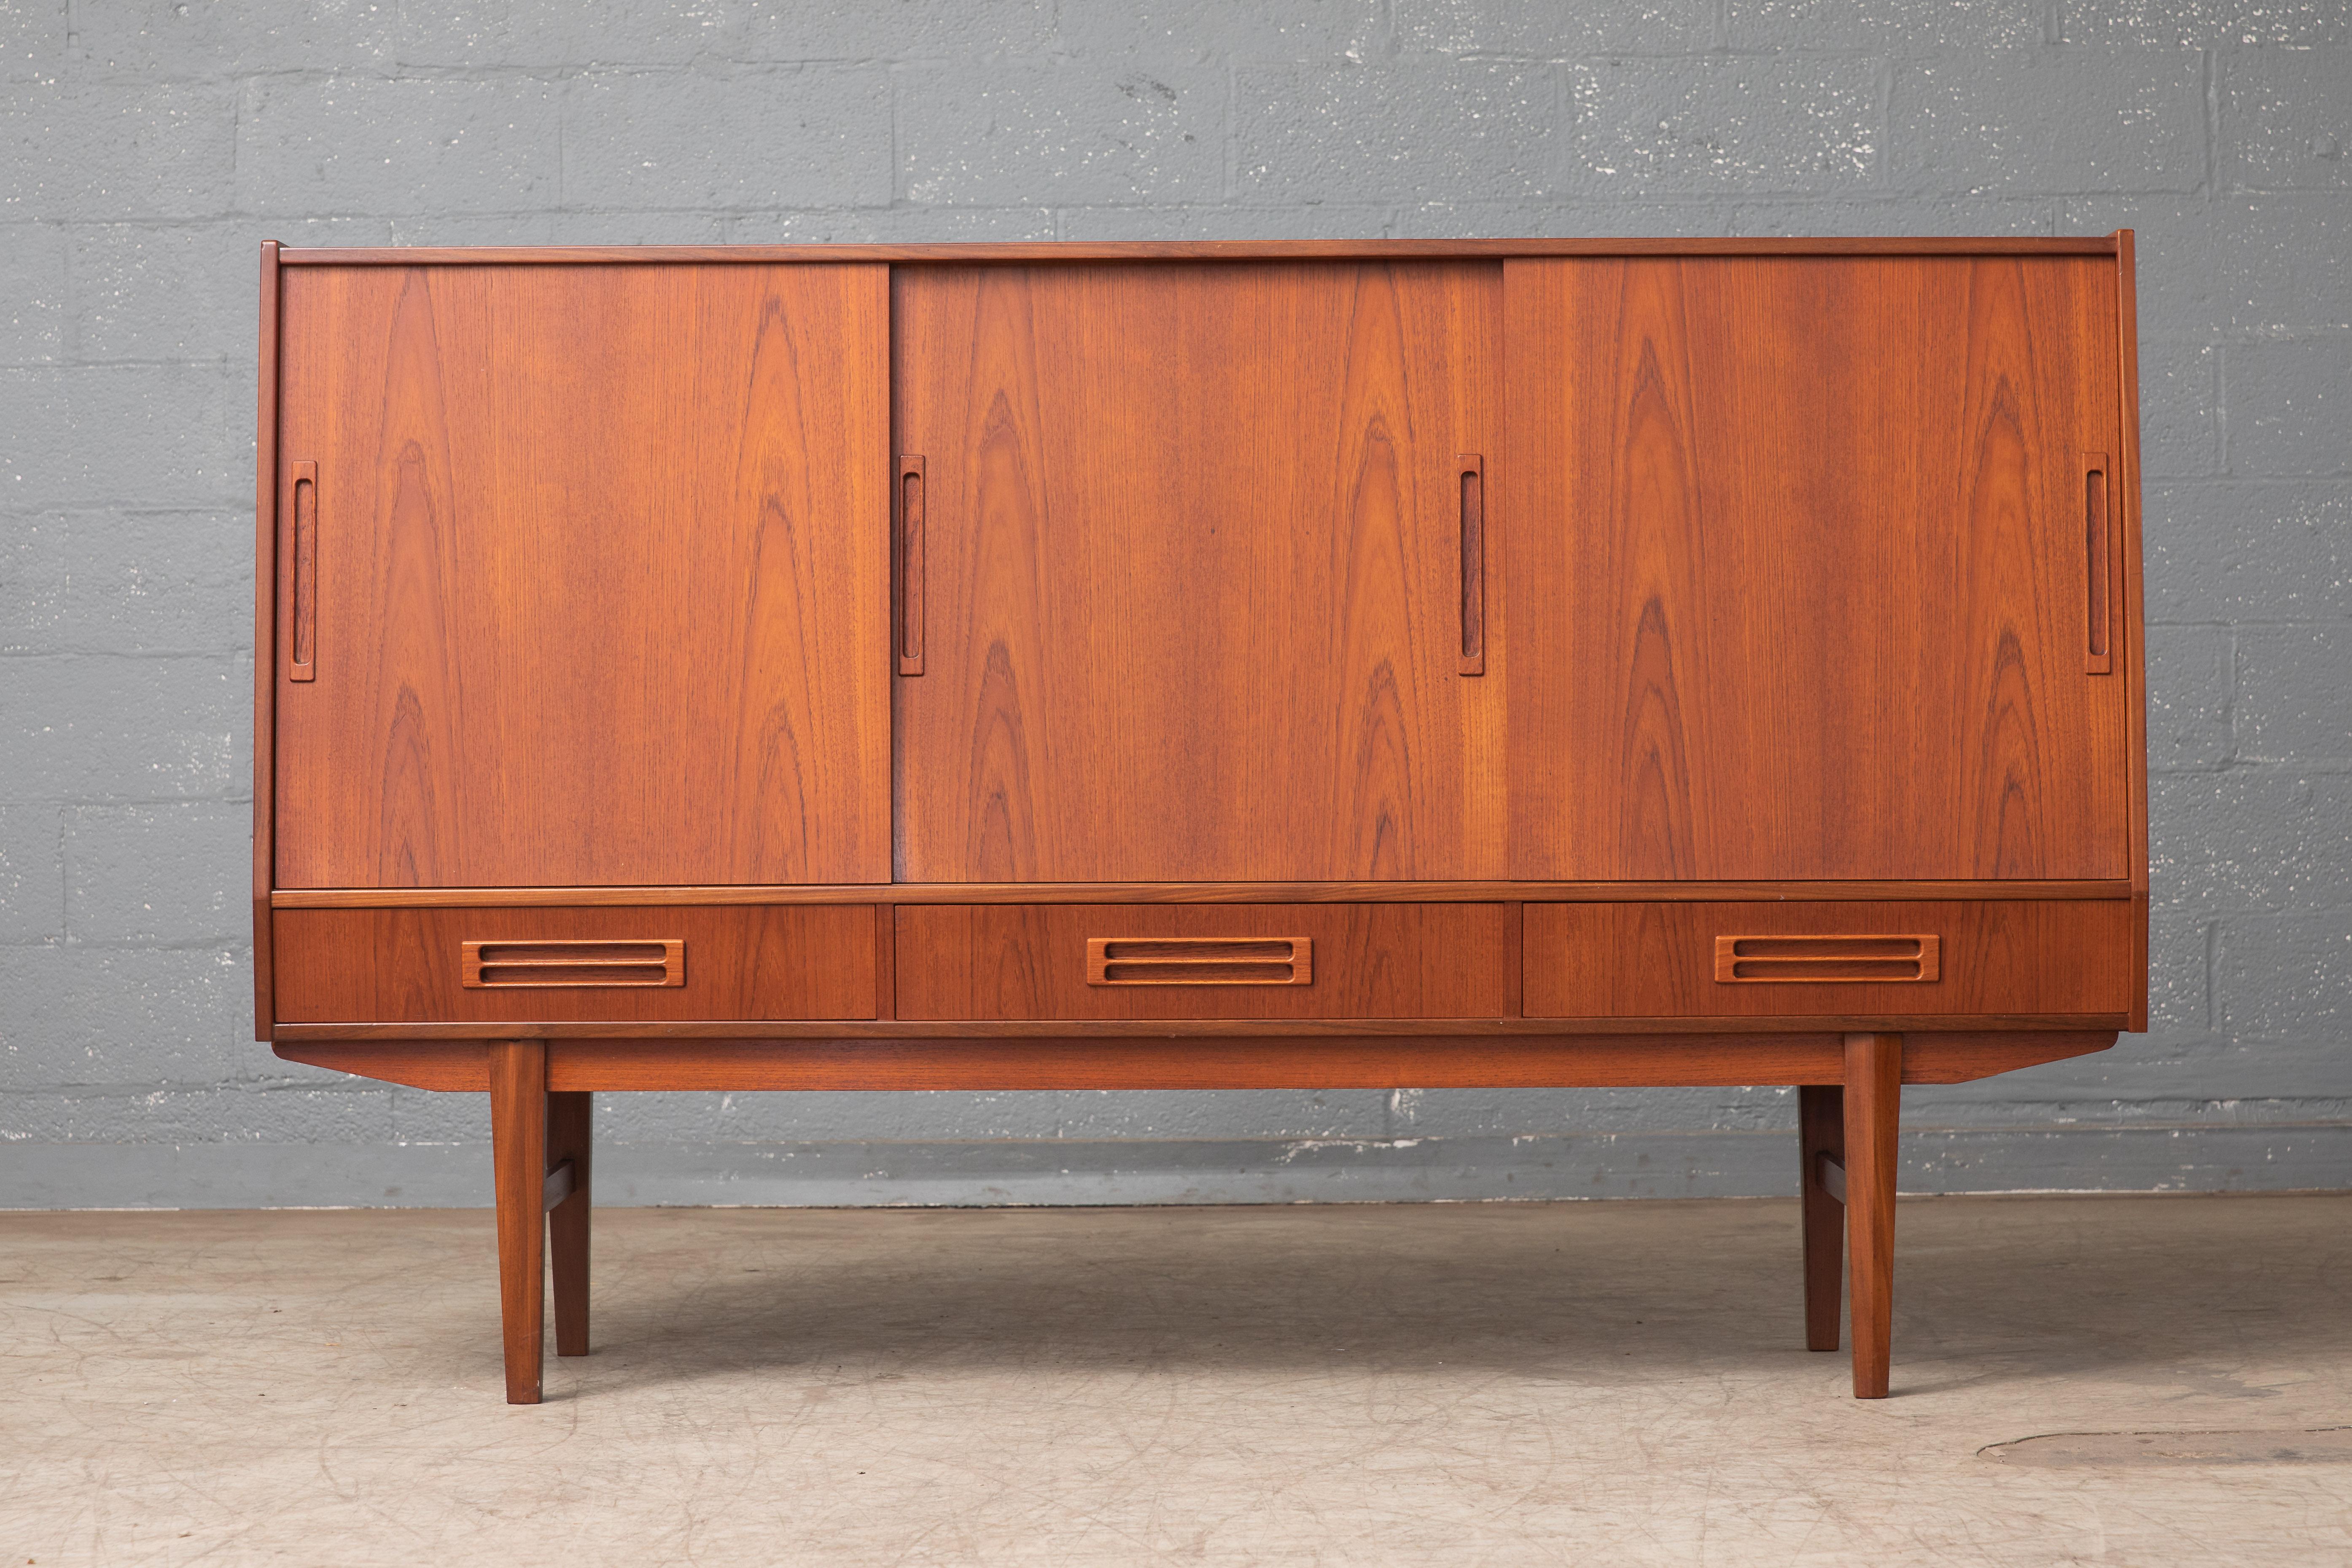 Fantastic Danish highboard manufactured in the late 1950s. Elegant timeless design piece with a nice size and presence about it without being too imposing. High caliber build quality with all edges in thick solid teak. Nice beautiful rosewood bar